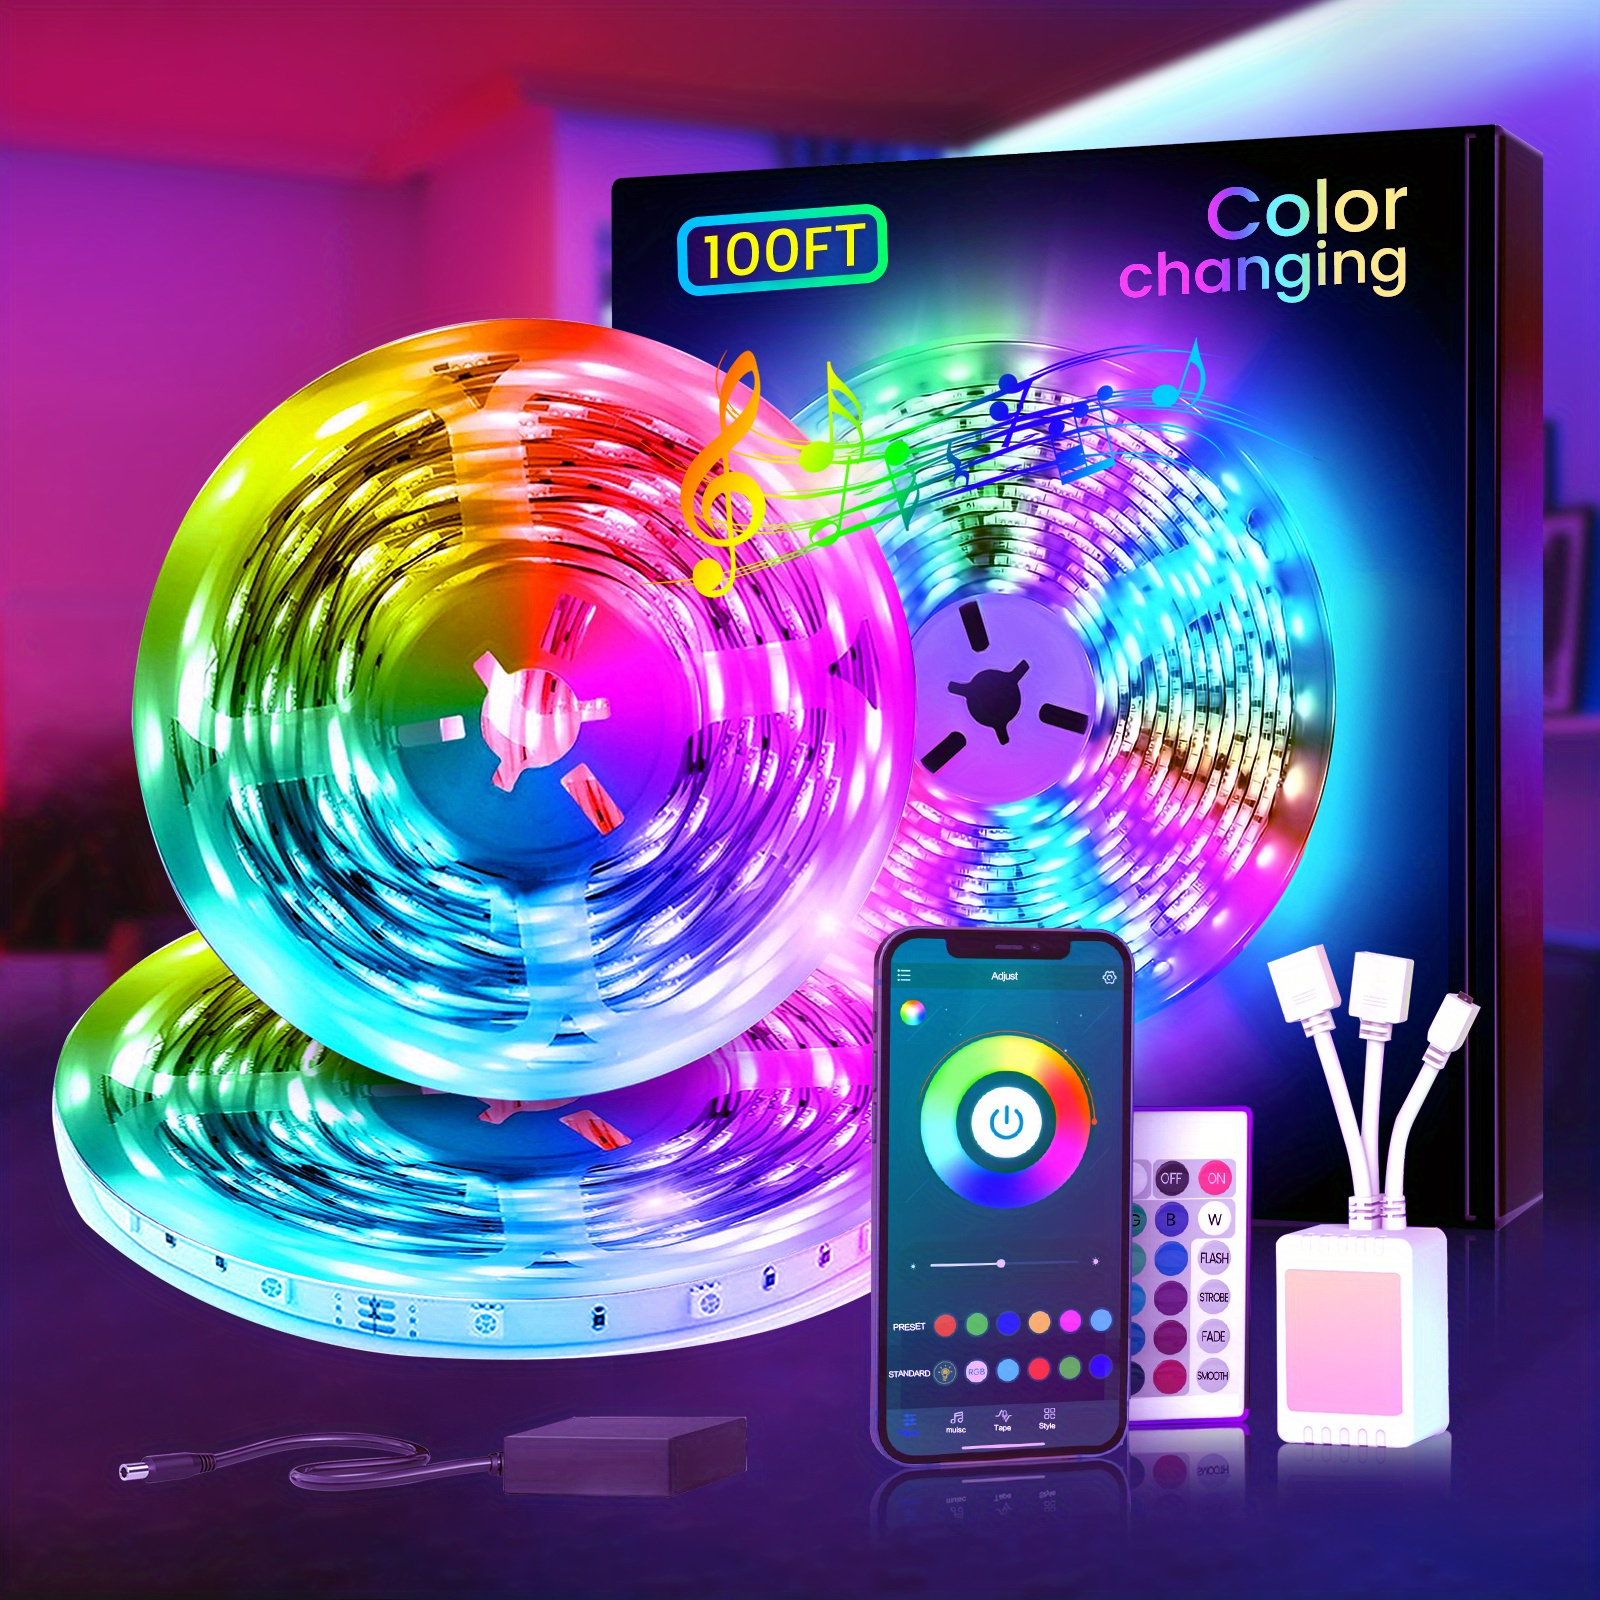 

25/100/130ft Rgb Led Strip Lights, 16 Million Color Changing, App Control And 24-key Remote Control, Enhanced Music Sync, Lights For Room Decor, Party,